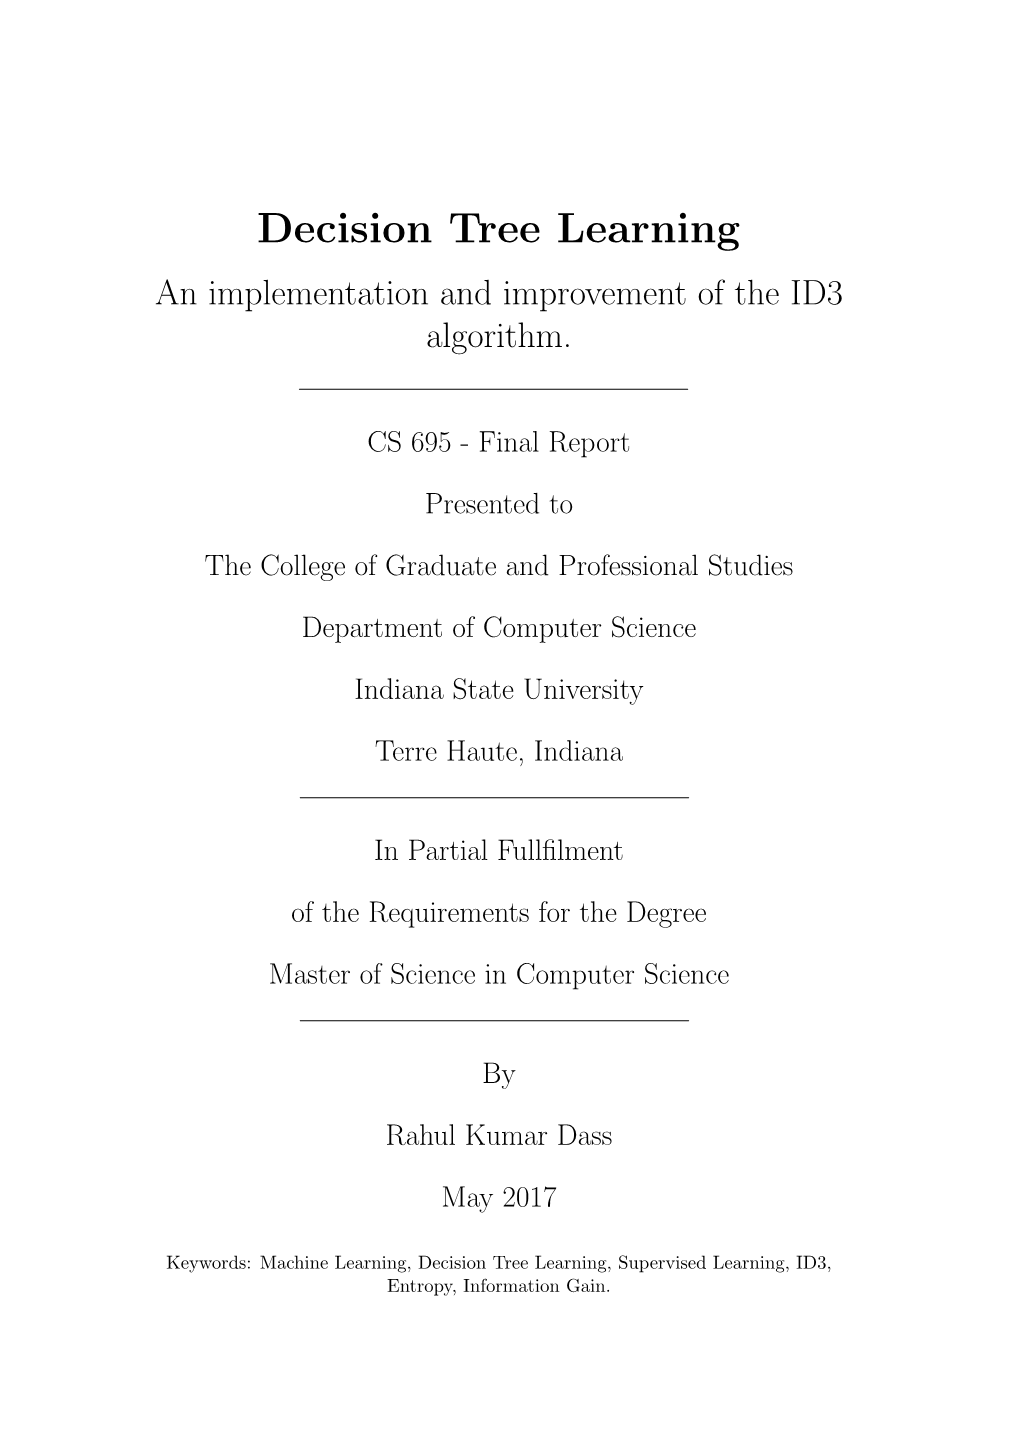 Decision Tree Learning an Implementation and Improvement of the ID3 Algorithm